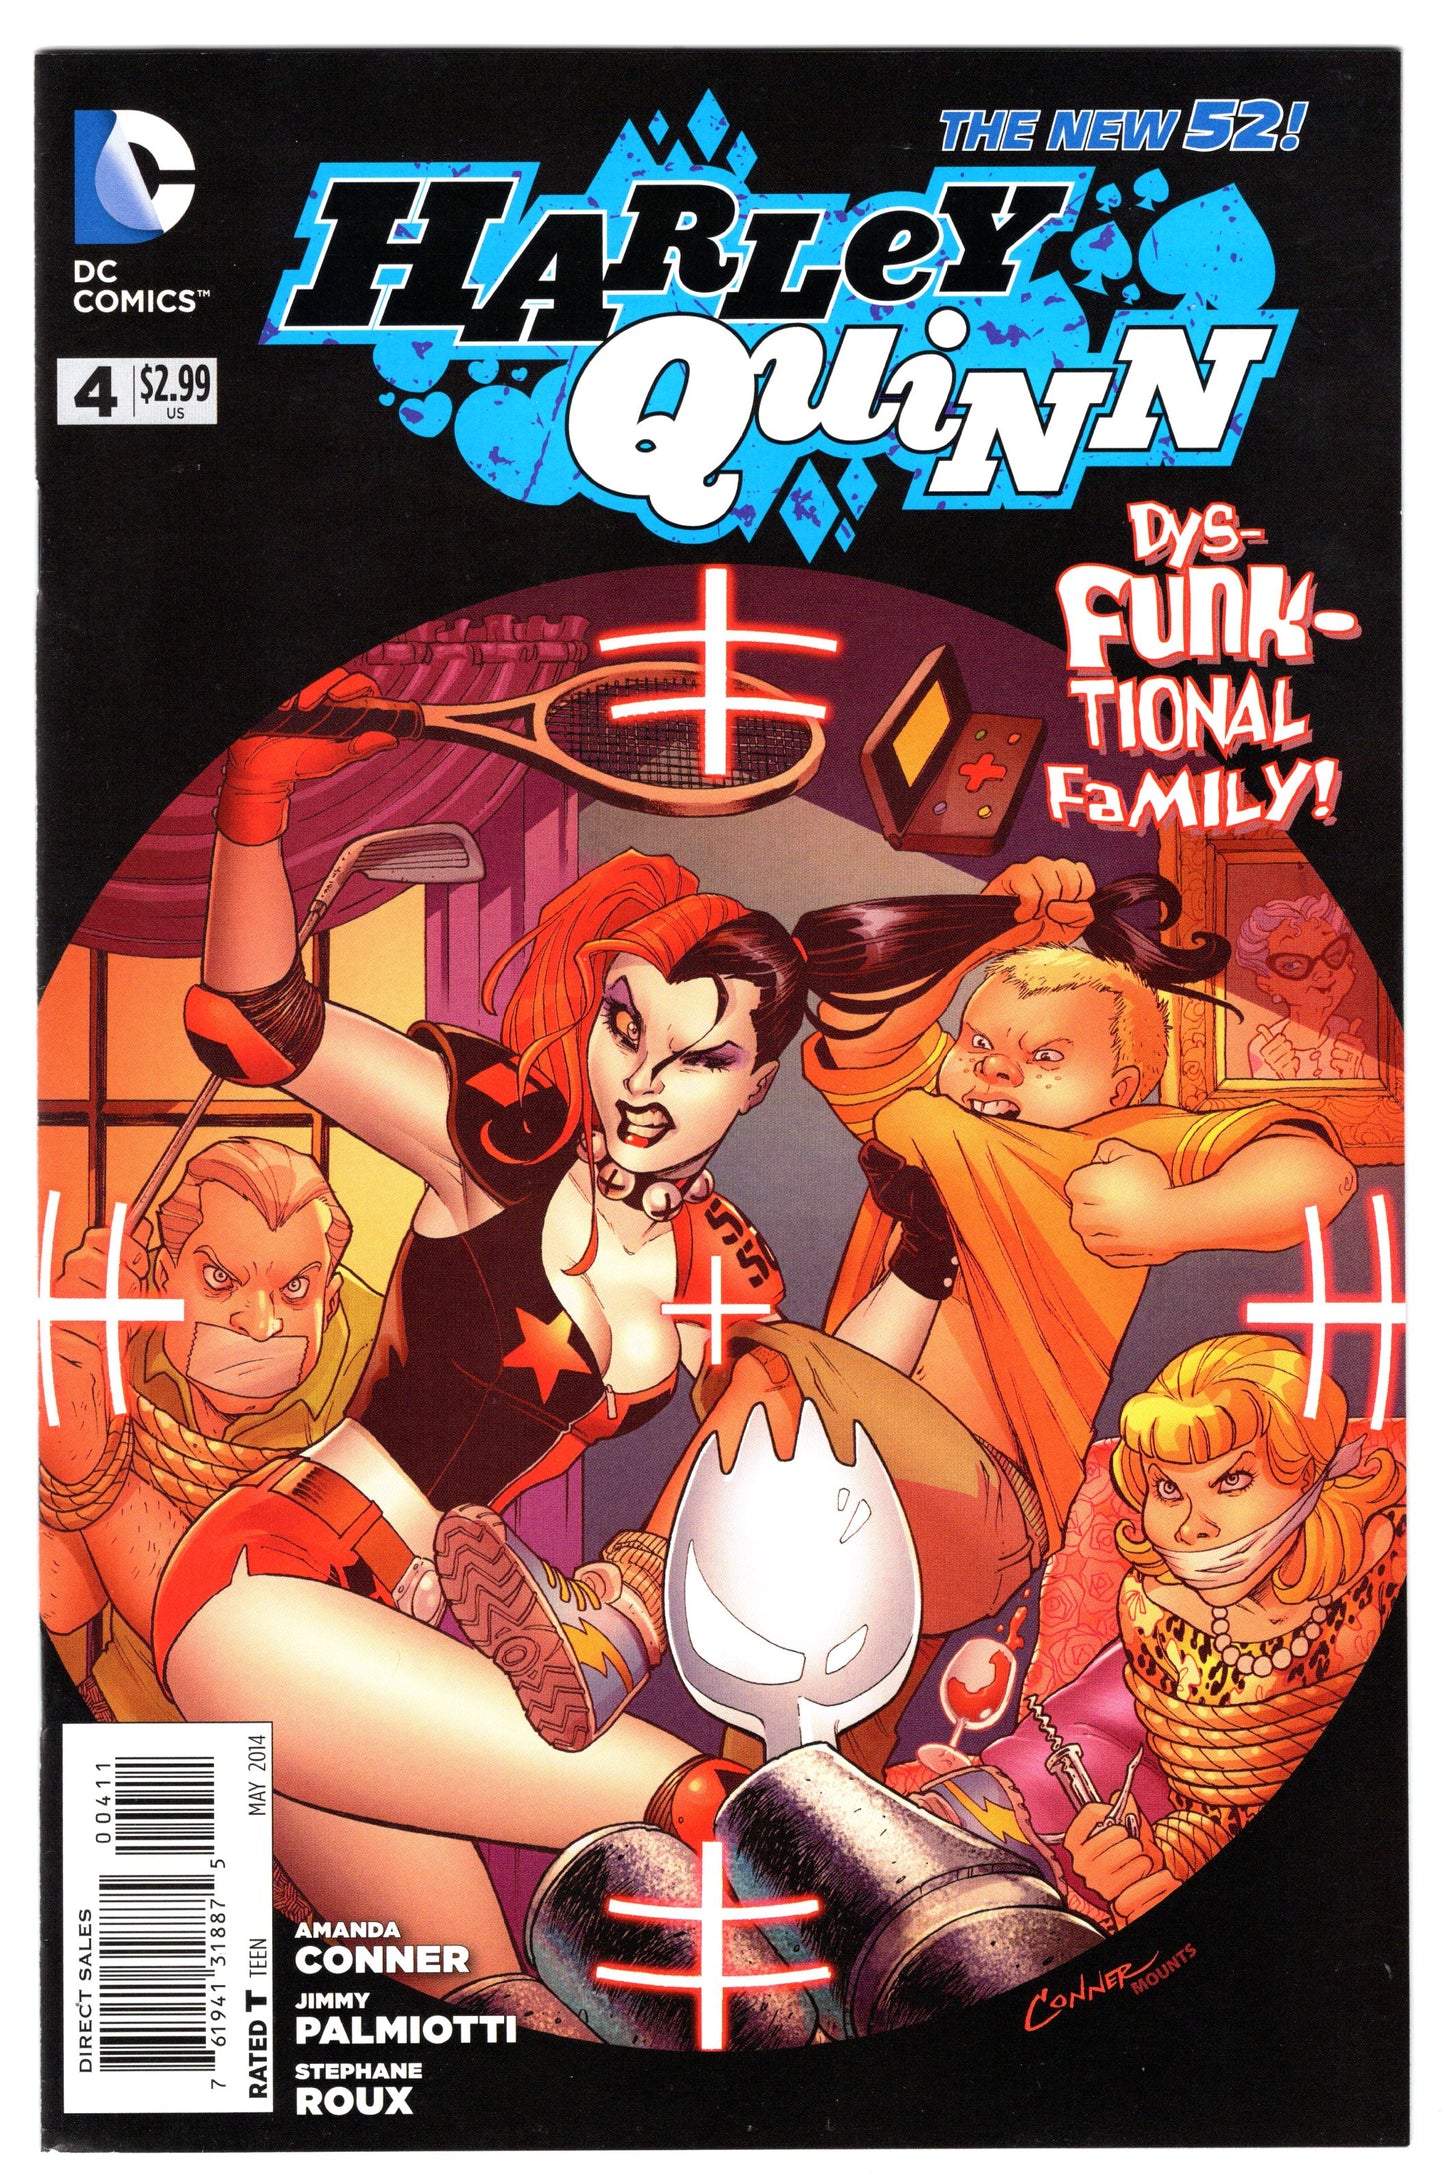 Harley Quinn - Issue #4 "Dys-Funk-tional Family!" (May, 2014 - DC Comics) VF/NM